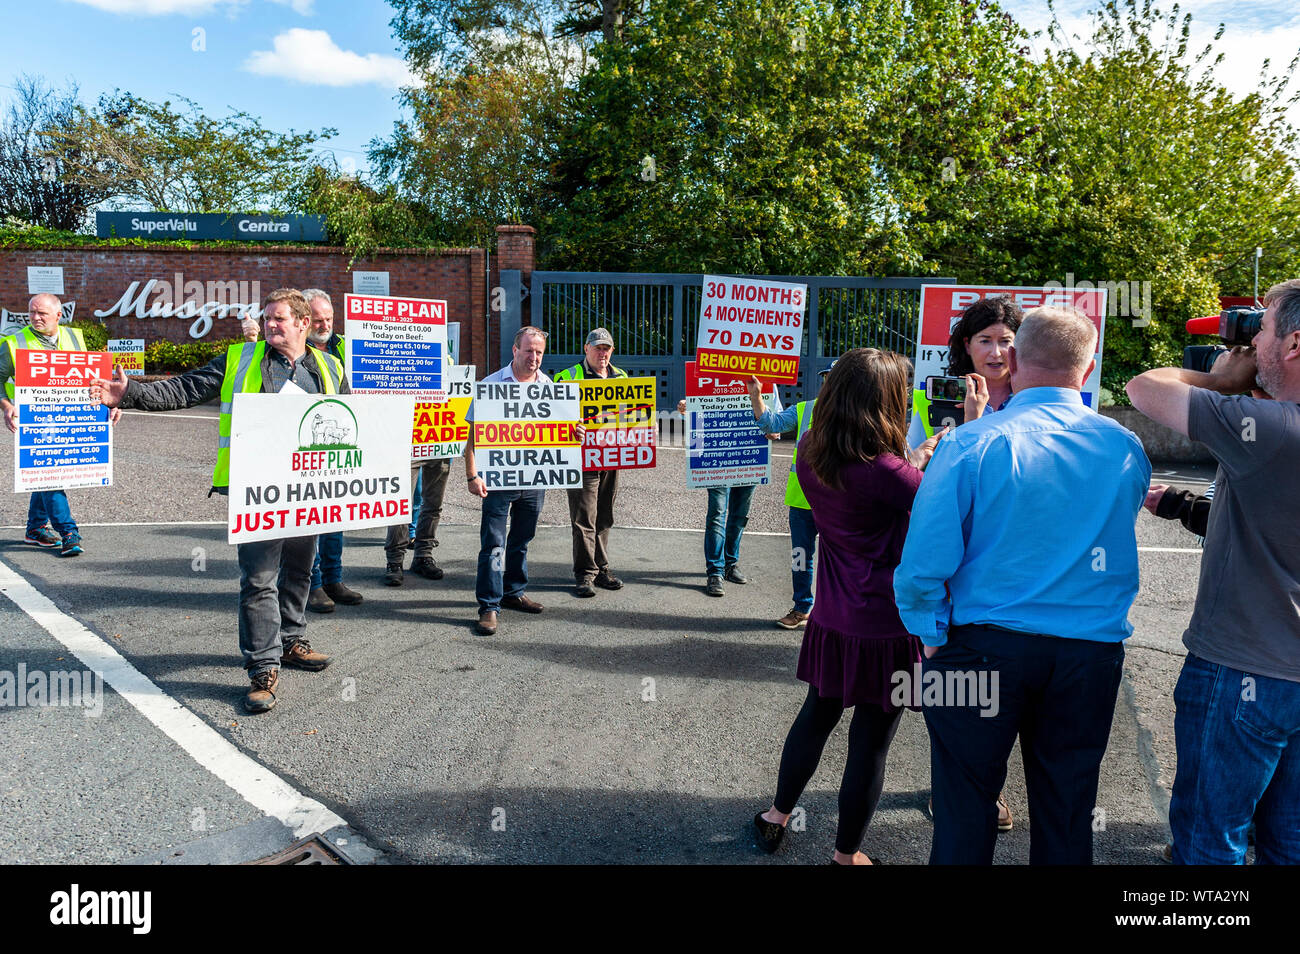 Cork, Ireland. 11th Sept, 2019. Farmers started a lightning picket outside Musgrave's Distribution Centre on Tramore Road this afternoon.  Farmers say they want the retailers to sit round the table and engage with them regarding the price per KG for their beef, something which the retailers have so far refused to do. Beef Plan member Helen O'Sullivan spoke to the press. Credit: AG News/Alamy Live News. Stock Photo